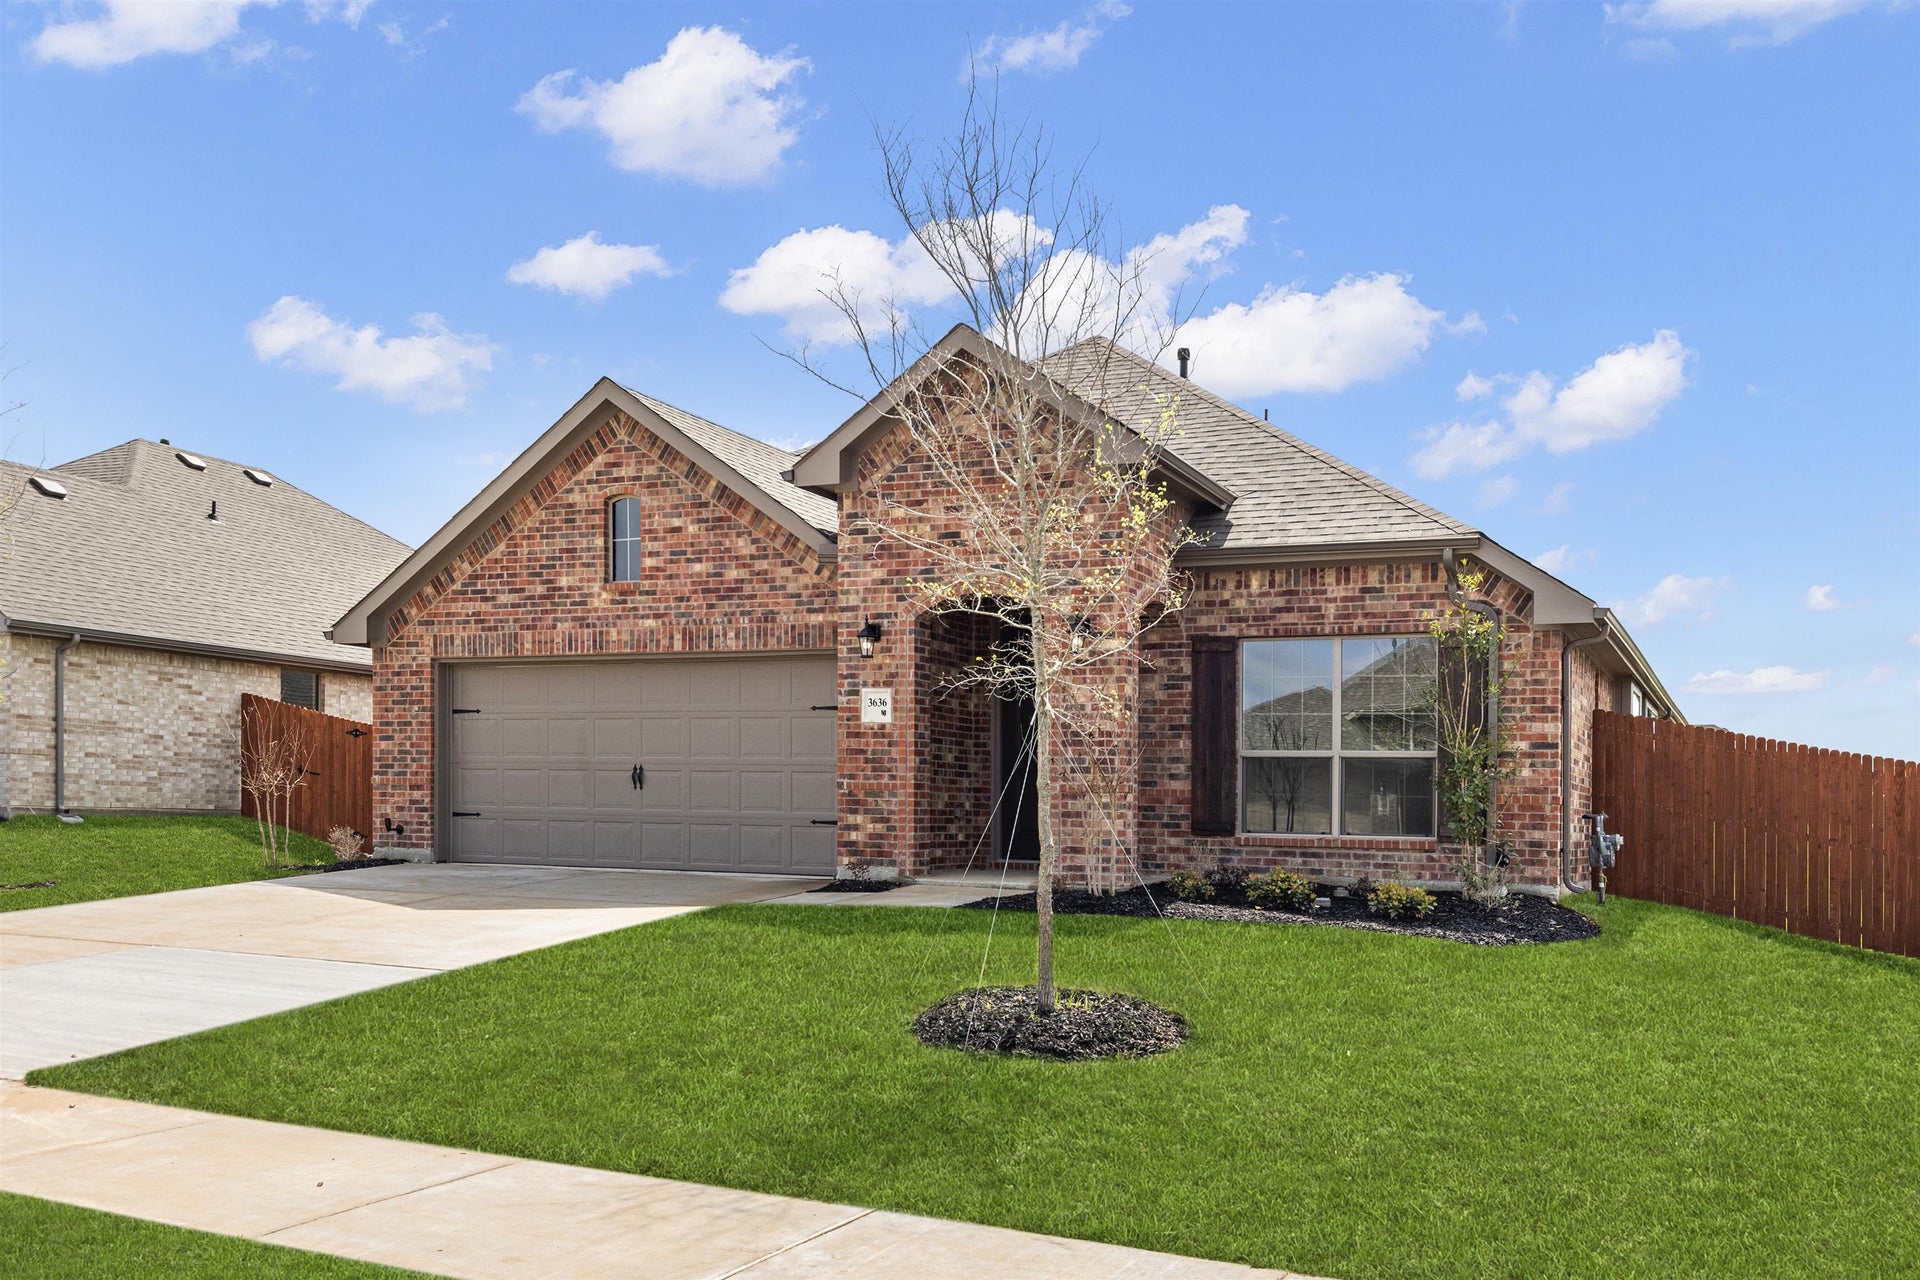 3br New Home in Heartland, TX